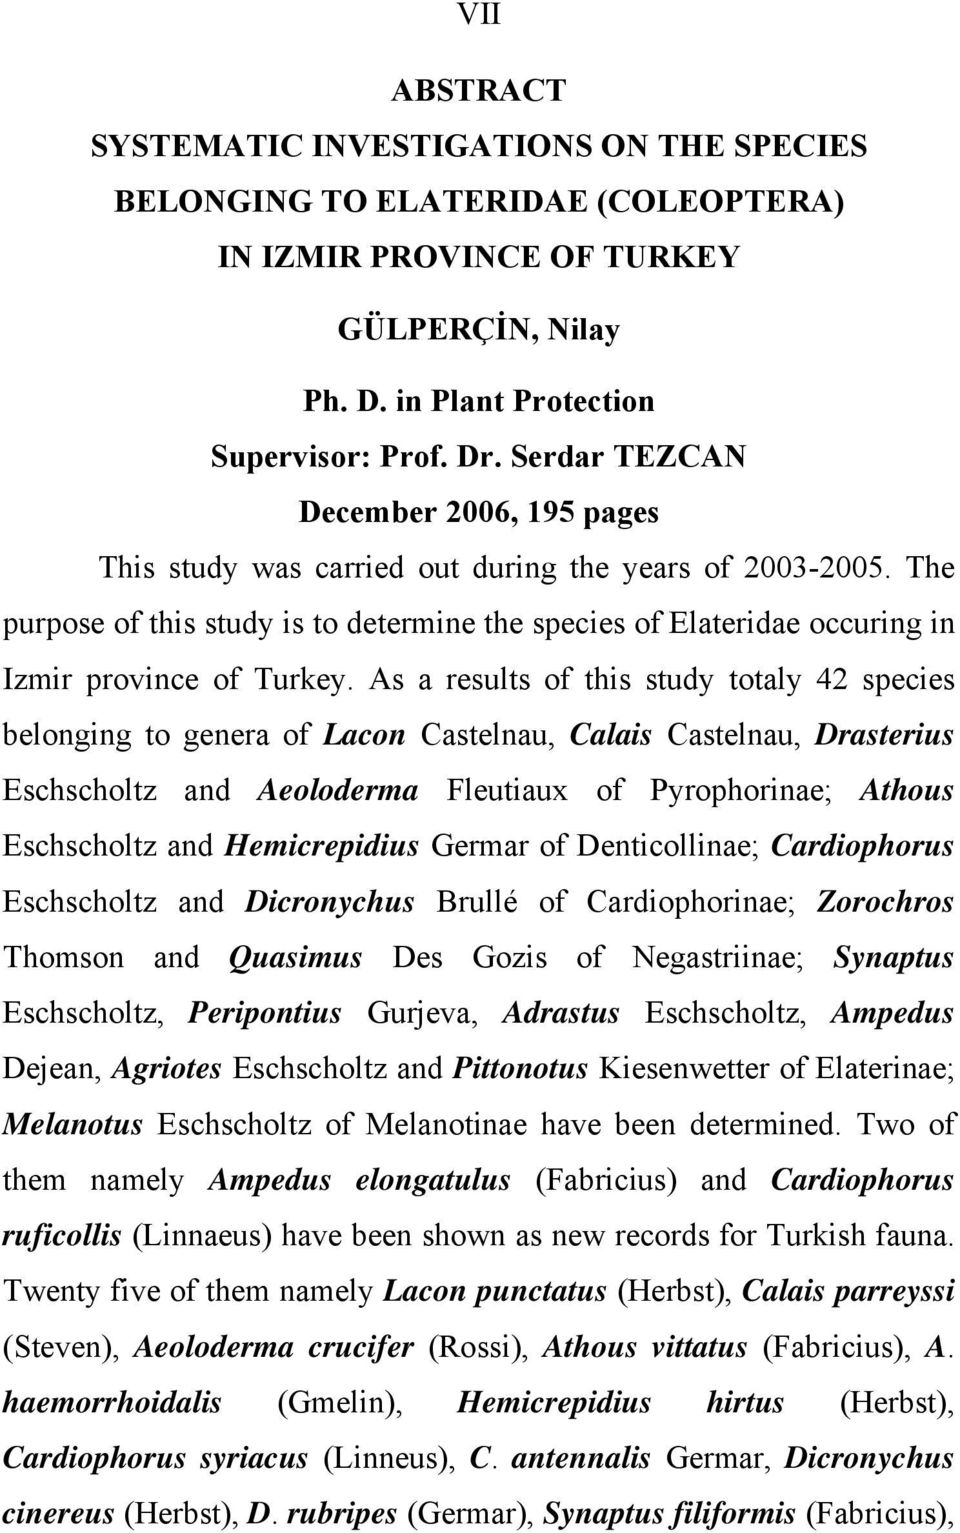 The purpose of this study is to determine the species of Elateridae occuring in Izmir province of Turkey.